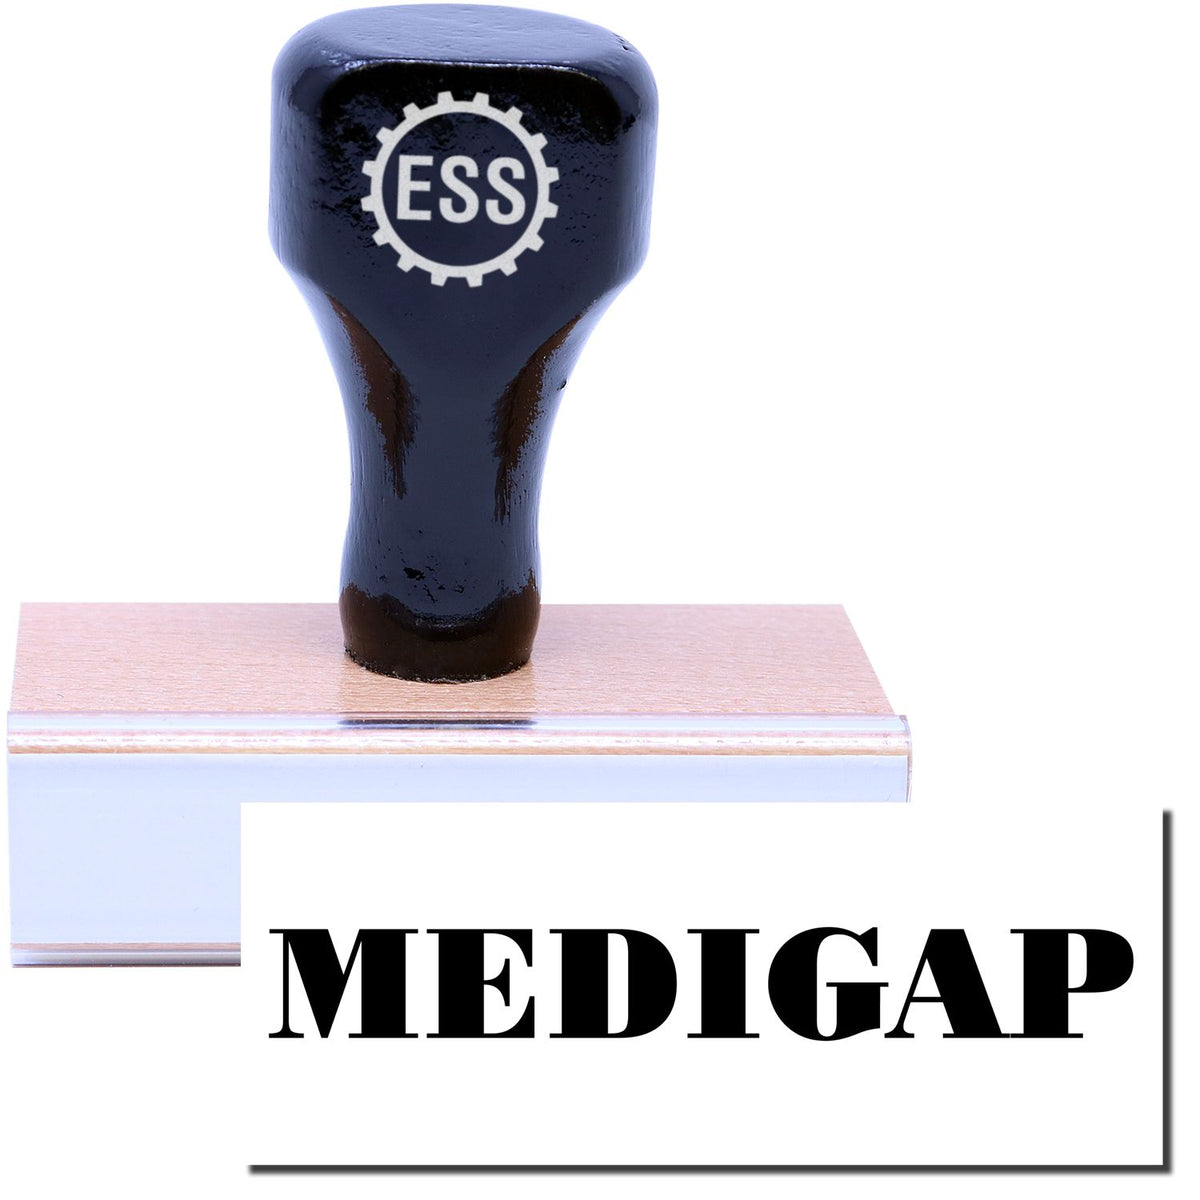 A stock office medical rubber stamp with a stamped image showing how the text &quot;MEDIGAP&quot; is displayed after stamping.